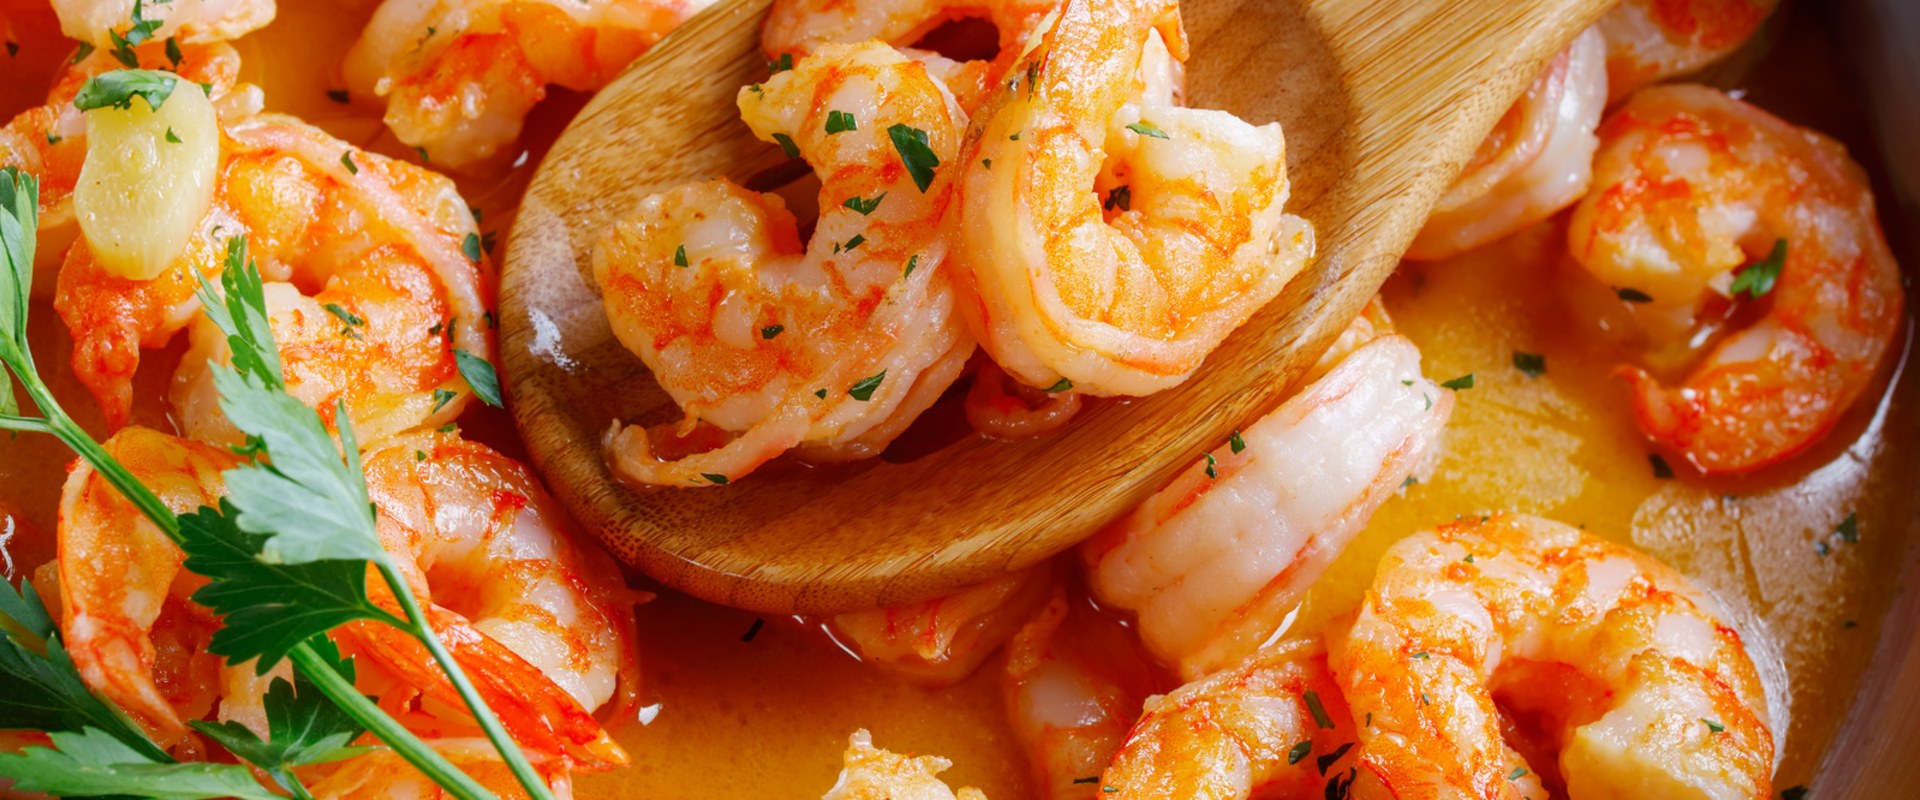 Shrimp: An Introduction to this Delicious Seafood Ingredient